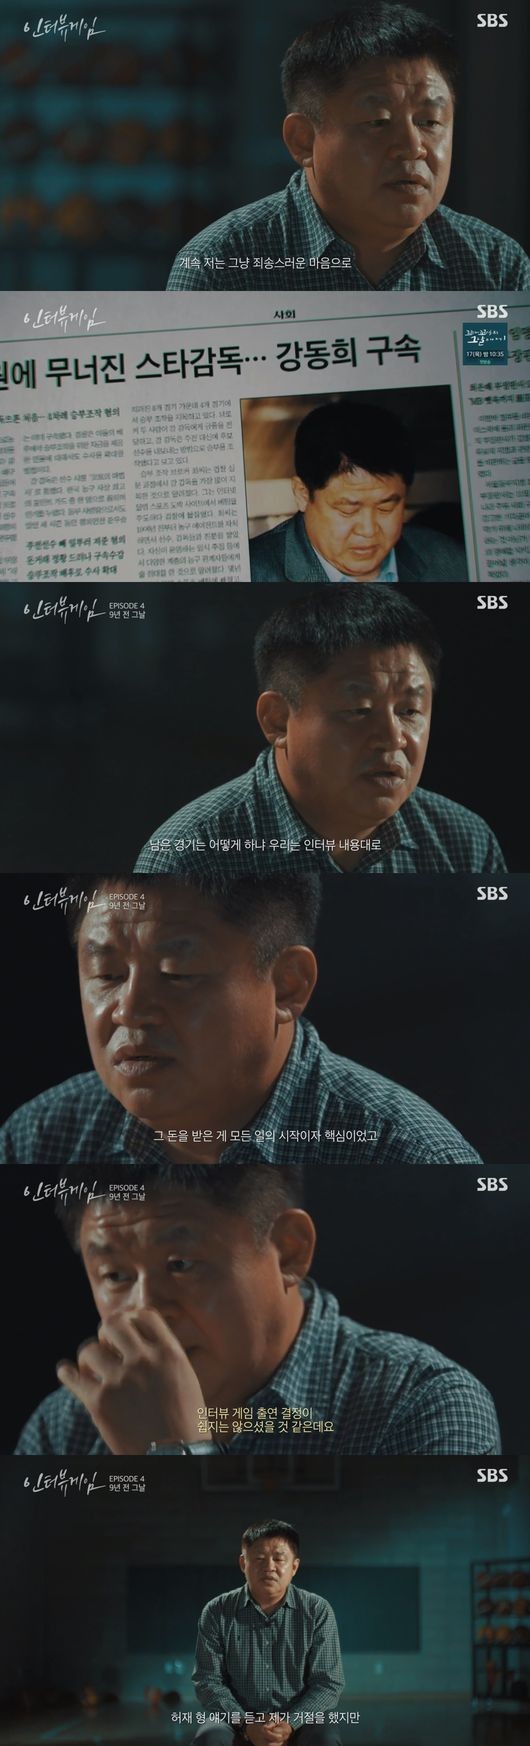 Hur Jae, an artistic popular, bought an unexpected feeling of favor.Heo Ung - Heo Hoon, two handsome and basketball-good sons, who bought a favorable feeling for the whole nation because of Hubridge, but it is because he made Friend wrong.JTBC s Shooting to Shoot broadcast on the afternoon of the 27th was released.In the past, a basketball festival was set up to make Jaehyun a popular basketball craze that surpassed baseball and soccer.The viewers looked at the trailer with high expectations, but a person who did not think appeared.It was Kang Dong-hee, a former professional basketball coach who rocked the basketball board with Hur Jae in the past.If you look at the reputation and popularity of the prime, you will be the first to be a basketball party, but at present, Kang Dong-hee is a criminal who was punished for clear game manipulation.He admitted in 2011 that he was charged with manipulating the game by deliberately winning candidates instead of winning 47 million won for brokers during Wonju East coach.He was sentenced to 10 months in prison in 2013 and was permanently expelled from KBL.After completing his brother, Kang Dong-hee has been working as an anti-corruption education instructor of the professional sports association after going through self-sufficient time.Recently, basketball players such as 10 professional basketball teams have been subject to the petition to KBL to withdraw his expulsion, but no amnesty has been made.Kang Dong-hee appeared in a full-length evening entertainment that the whole family watches on Sunday evening. The anger of viewers toward the production team exploded and complaints were poured to stop the broadcast.In the end, the Shooting to Stolen side said on the 28th, I apologize for the fact that I was worried about the lack of sympathy for the public sentiment in the process of Jaehyun in the past basketball festival.I will edit the uncomfortable part to humbly accept the opinions of viewers. But the firestorm also splashed on Hur Jae.Kang Dong-hee appeared on SBS Interview Game which was broadcast in September 2020 and publicly asked the public for forgiveness. It was Hur Jae who proposed it to him.At the time, Hur Jae did not hide his affection for Kang Dong-hee, saying, I thought it would be nice to think that we talked together with everything.It is not known whether Kang Dong-hees Together to Shoot was a surprise picture of the production team or a friendship with Hur Jaes influence.However, there is a reasonable suspicion among netizens that Hur Jae actively helped Kang Dong-hee appear on the show, as in Interview Game.So Kang Dong-hee and the production team as well as Hur Jae were poured with blame.Above all, Hur Jae left scratches on the fire that I did not think because I had the Friend wrong in the situation where I was so favorable to both sons Heo Ung and Heo Hoon.DB, you have to stick together, interview Game